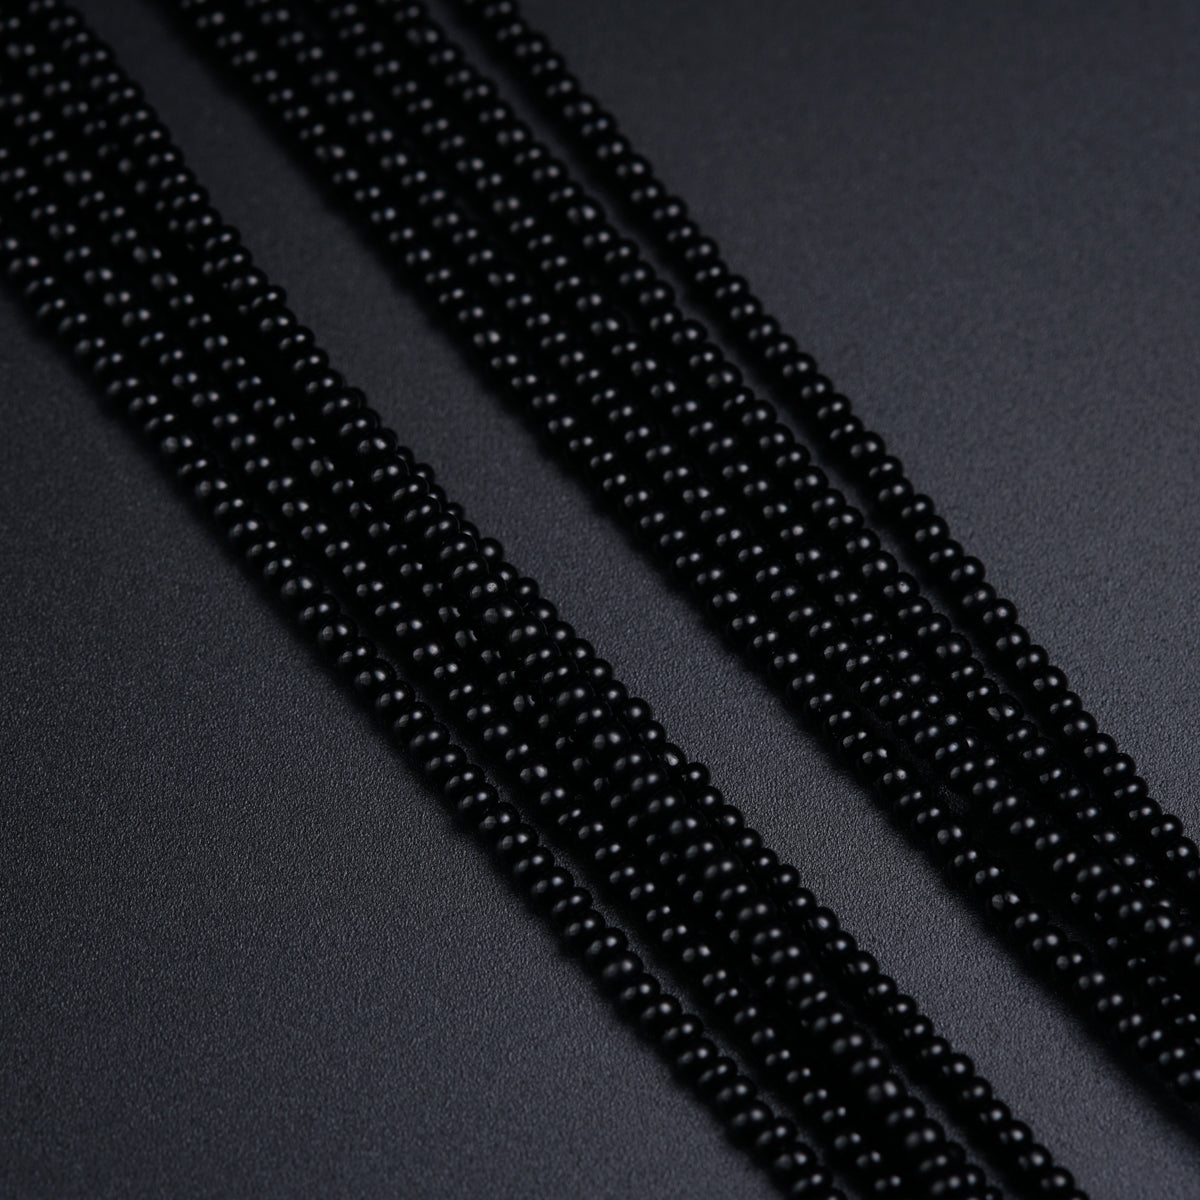 a close up of beads on a black surface